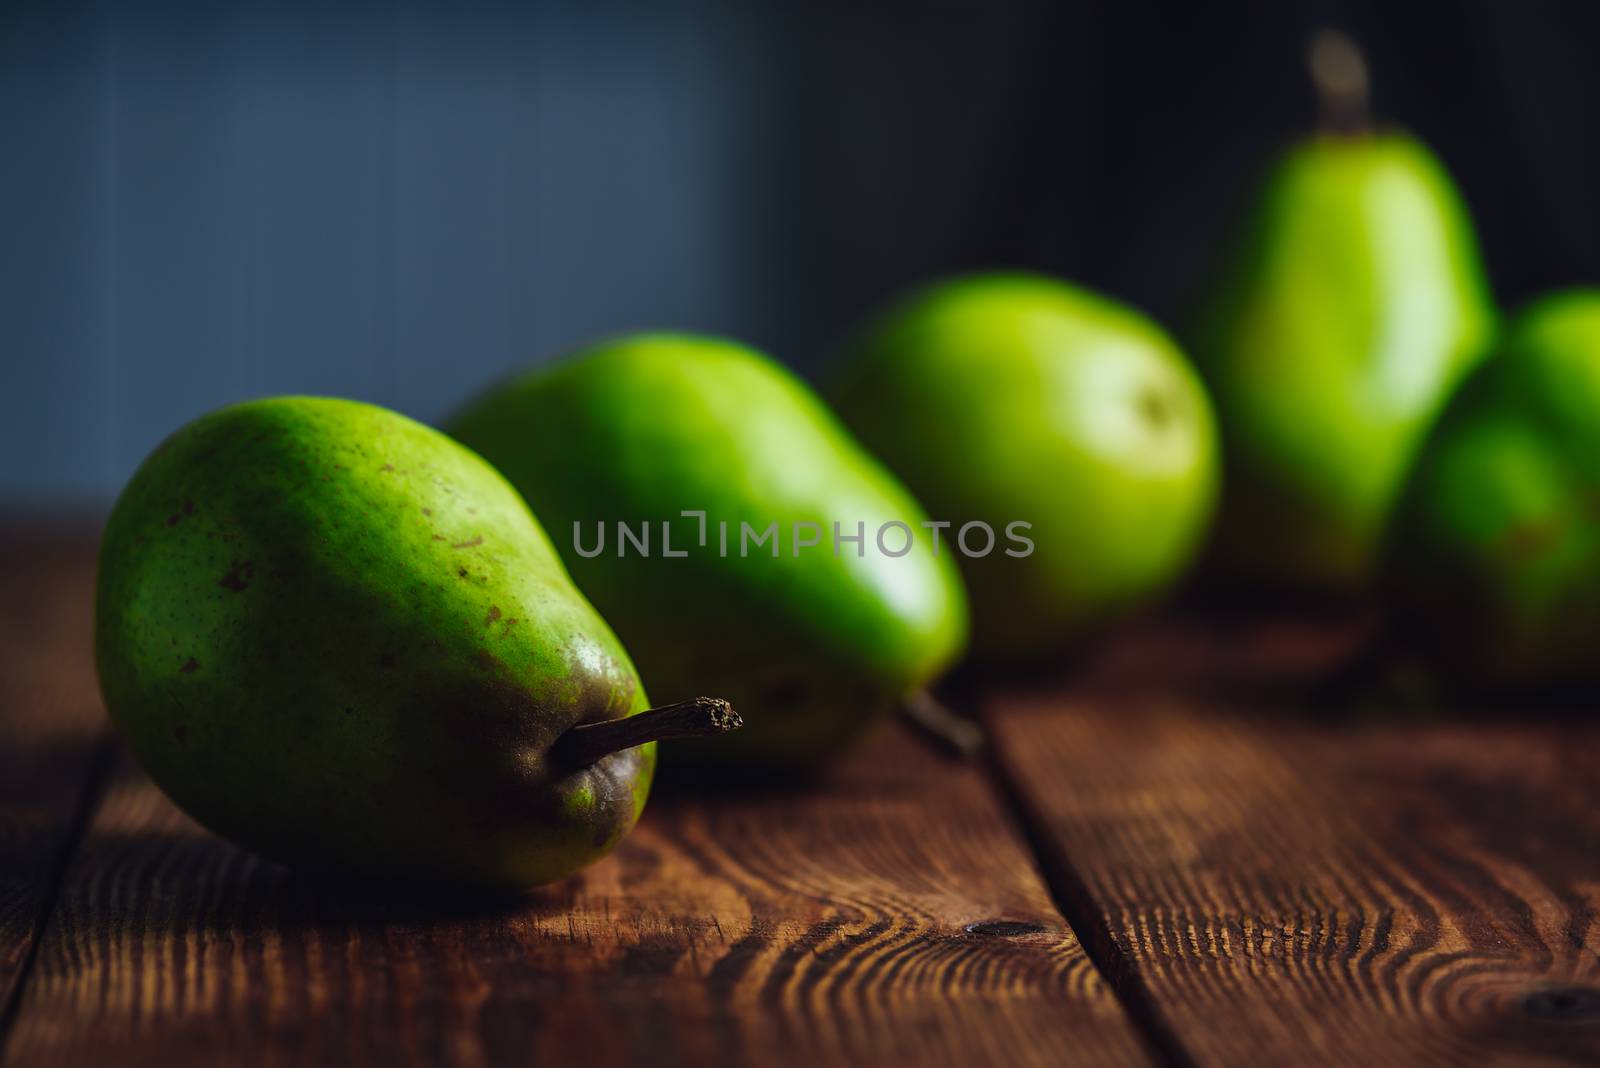 Pears on a Wooden Table by Seva_blsv